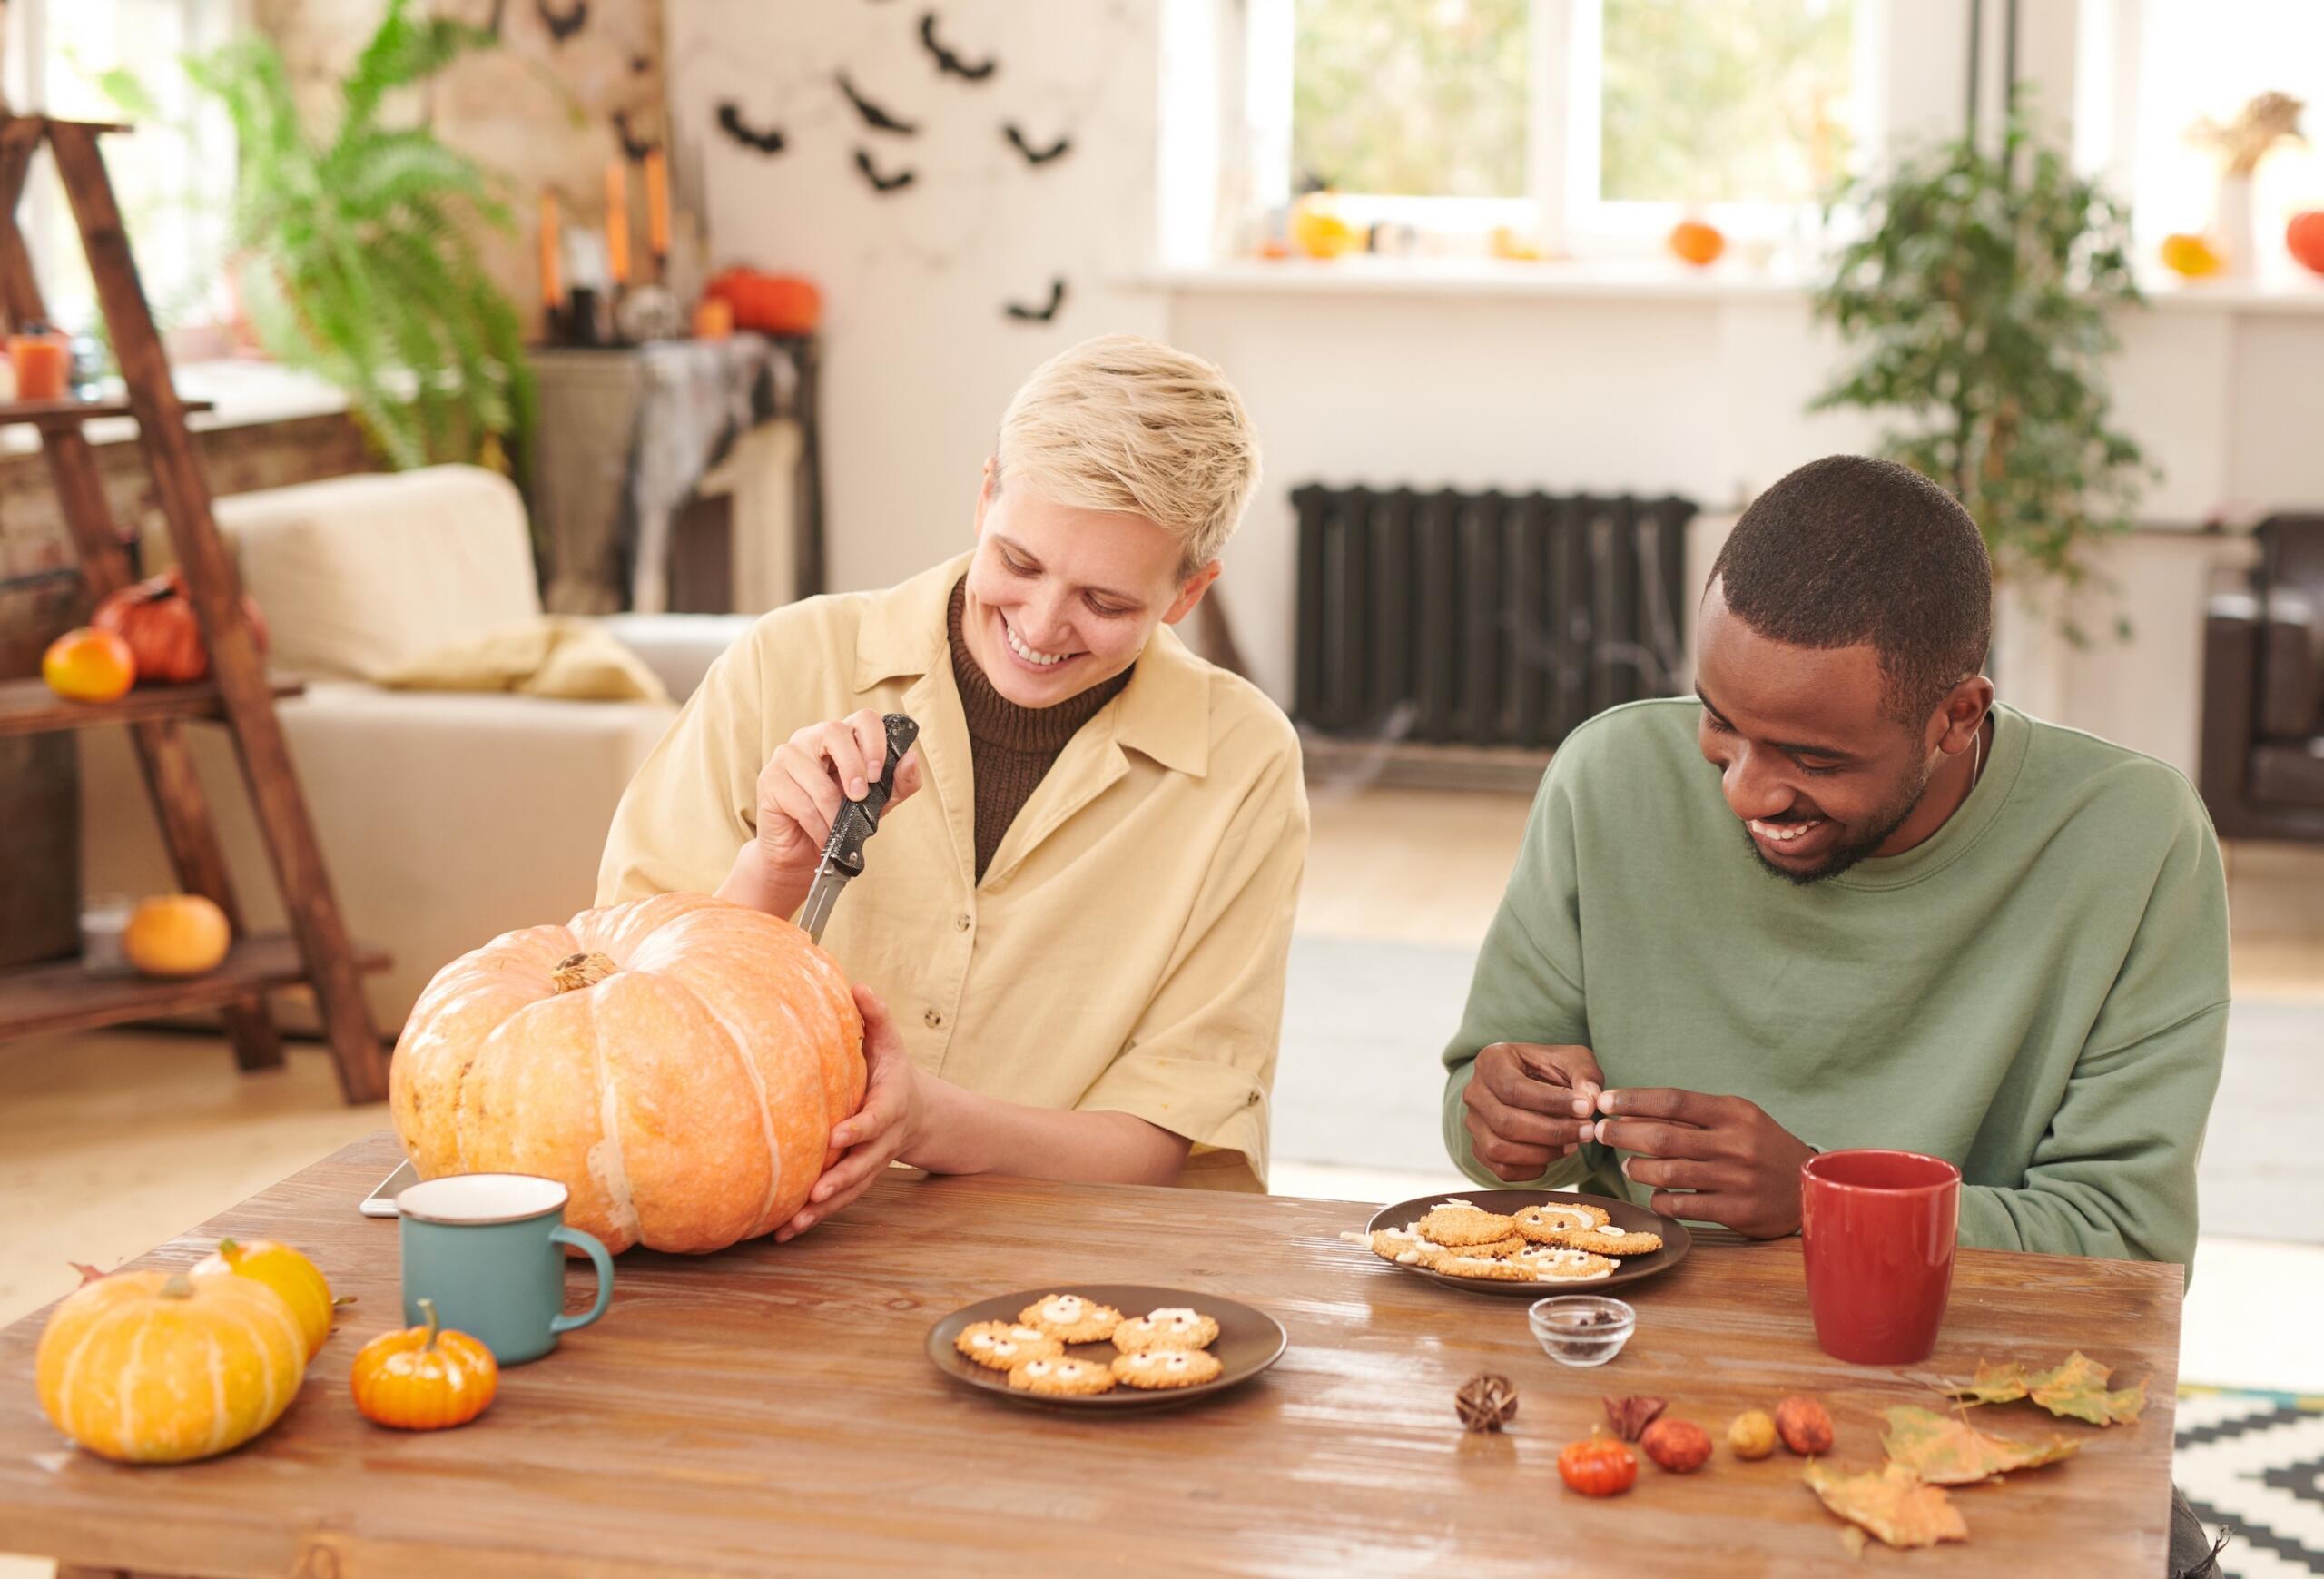 Find A Date This Halloween with These Themed Convo Starters